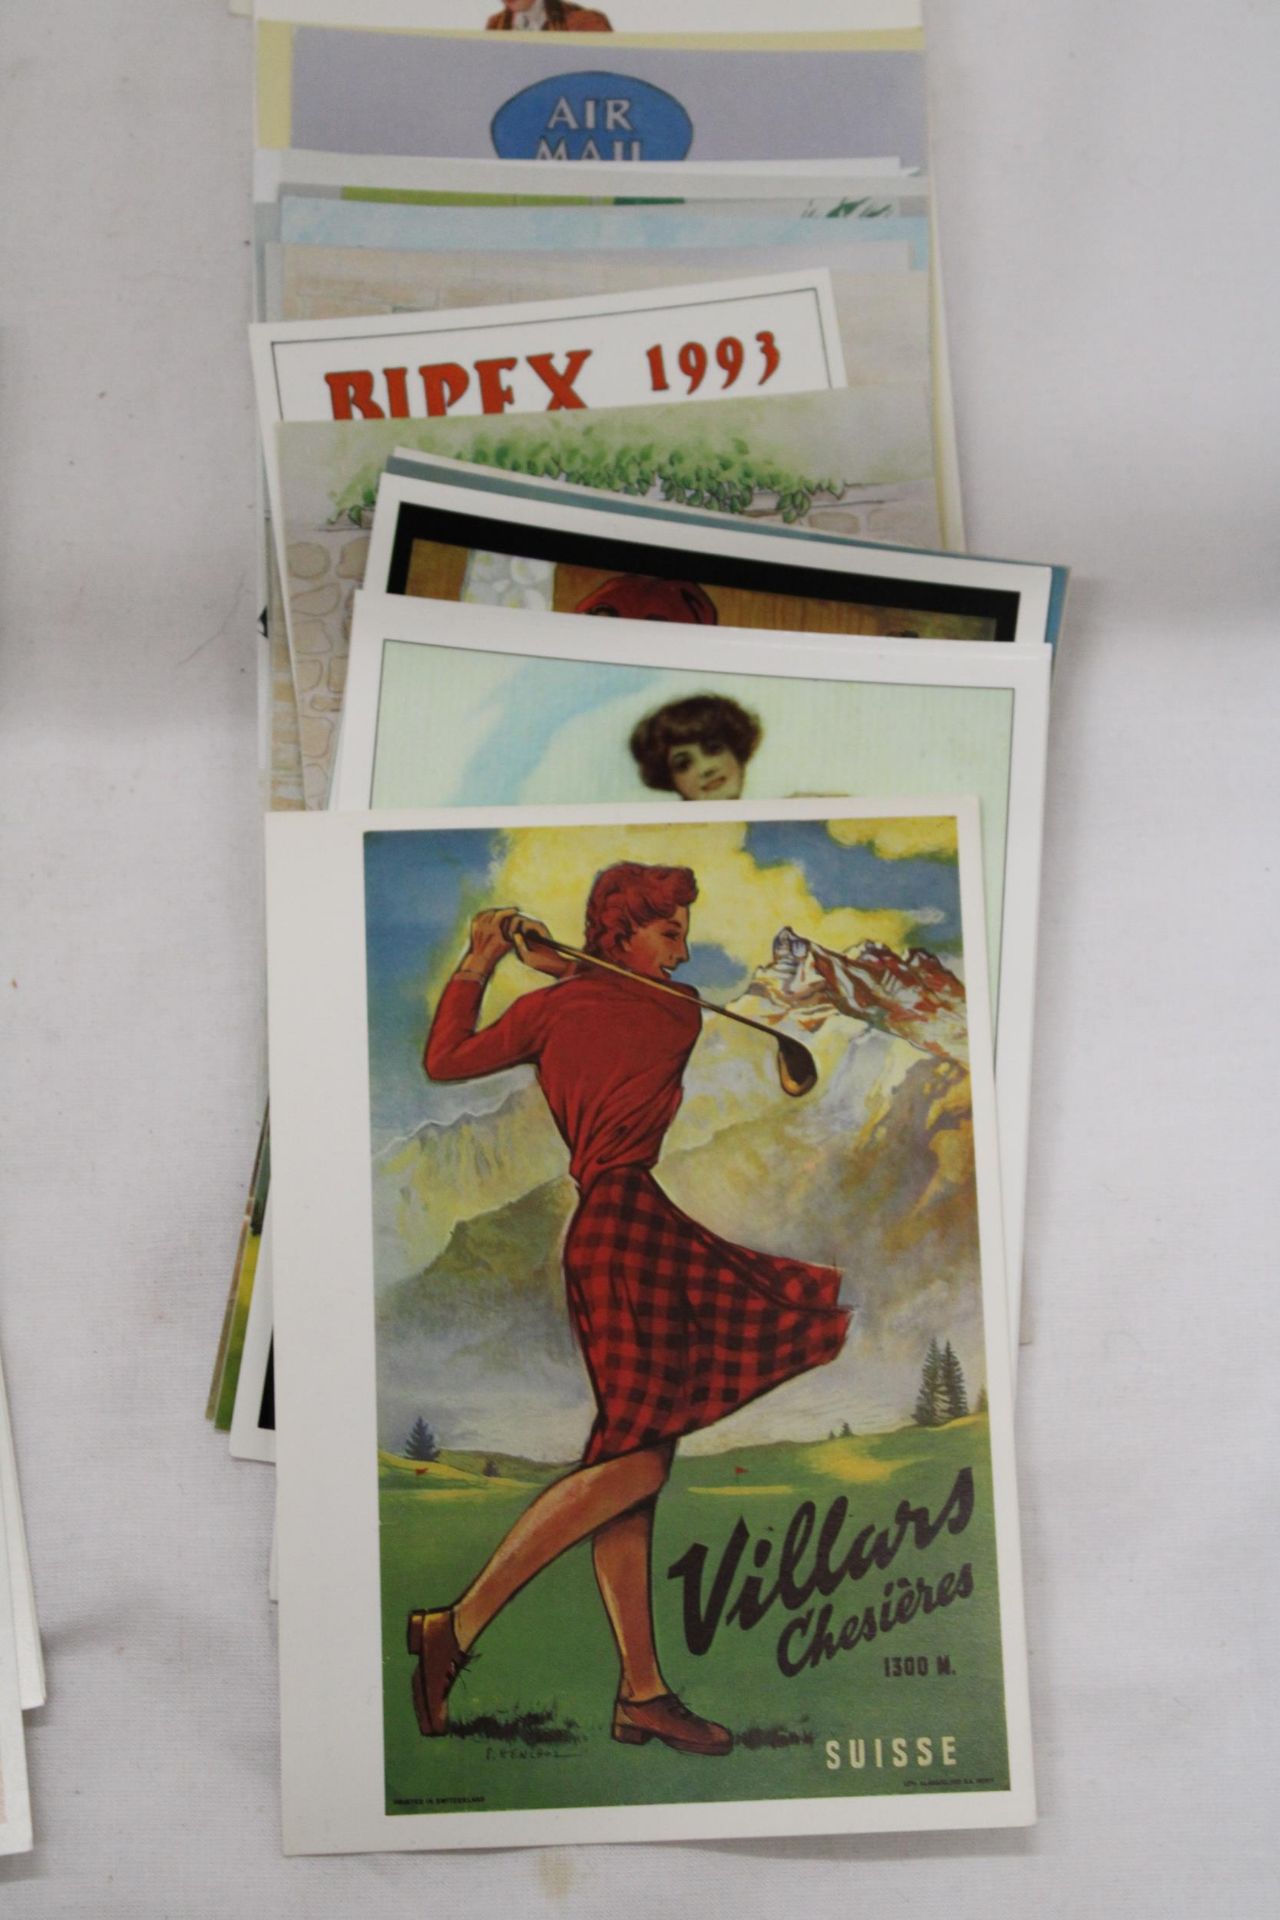 A COLLECTION OF POSTCARDS DEPICTING VINTAGE SPORTING CLOTHING STYLES - Image 4 of 5